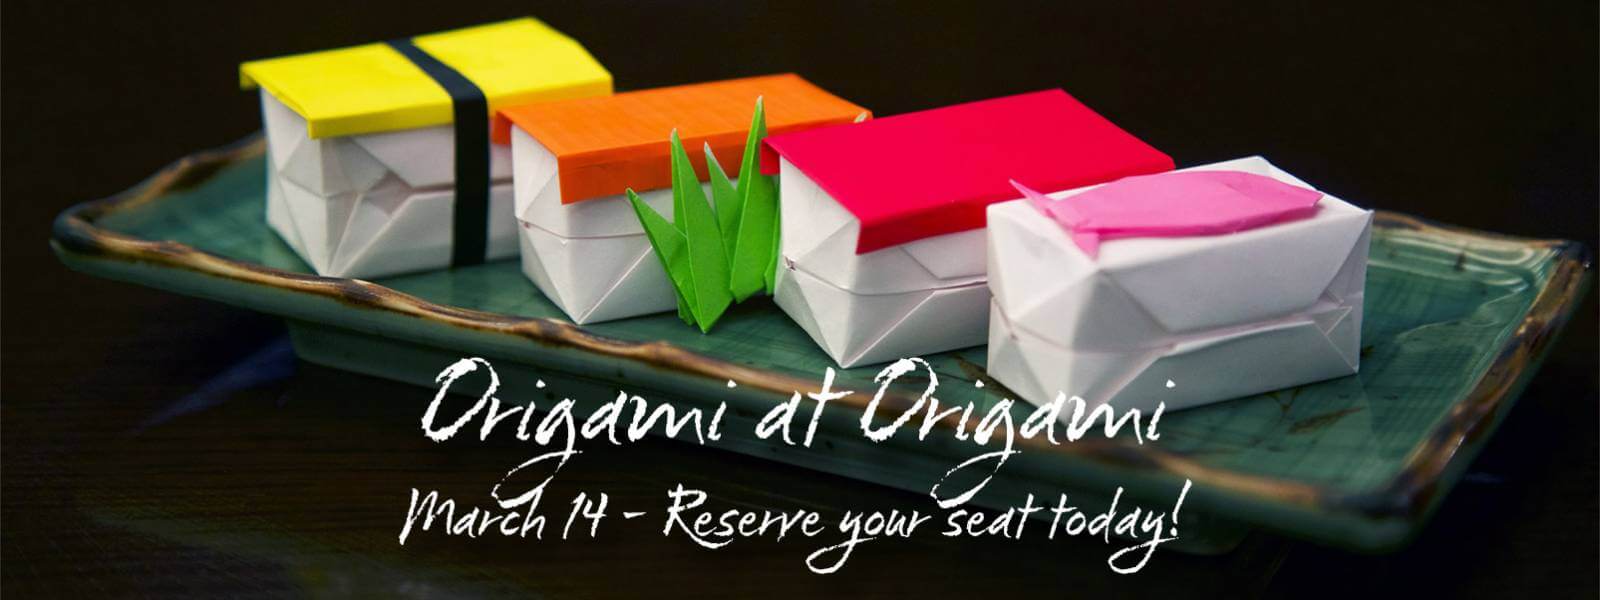 Origami at Origami March 14